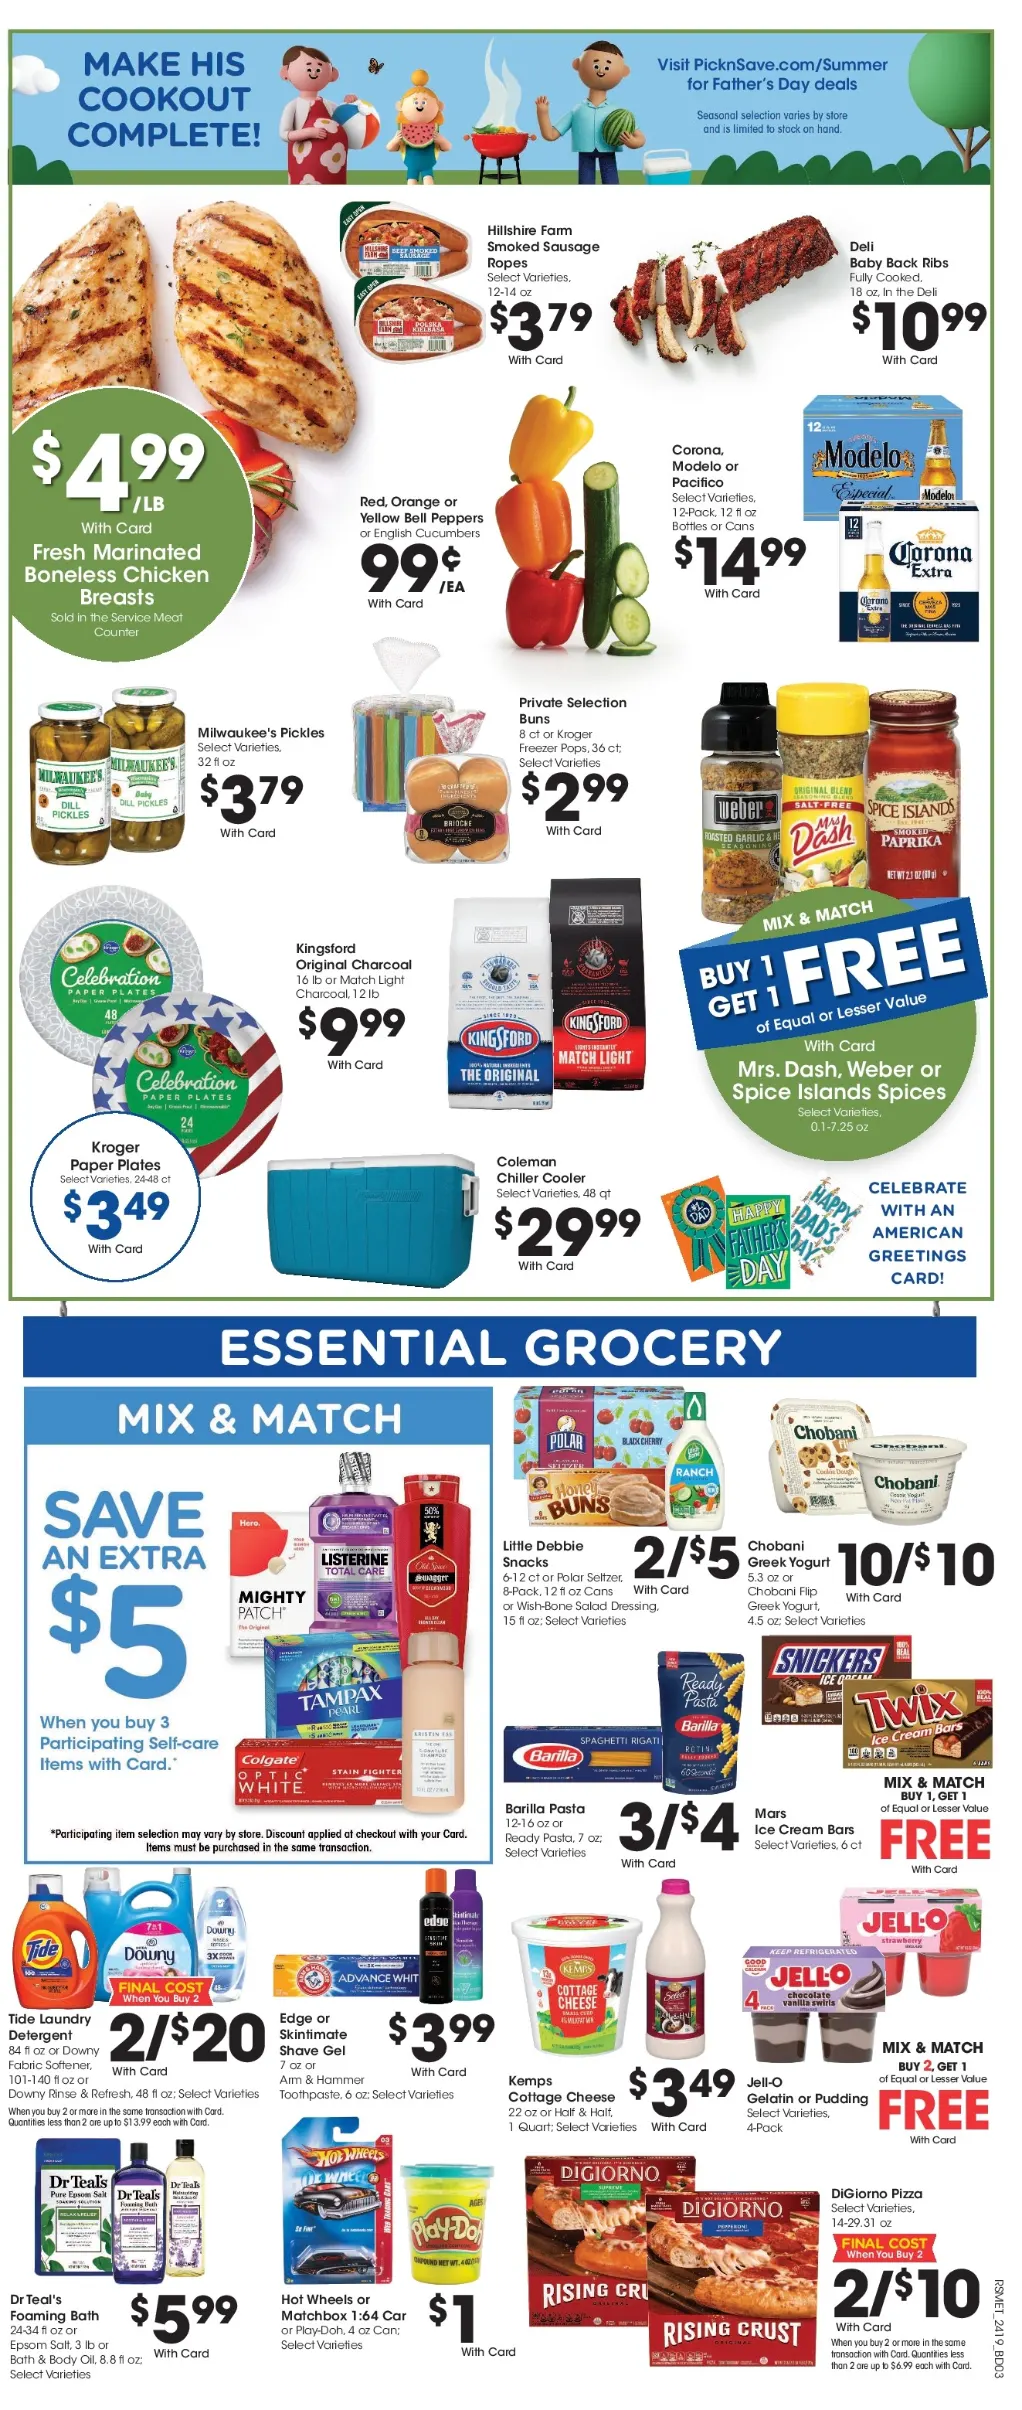 Pick n Save July 2024 Weekly Sales, Deals, Discounts and Digital Coupons.